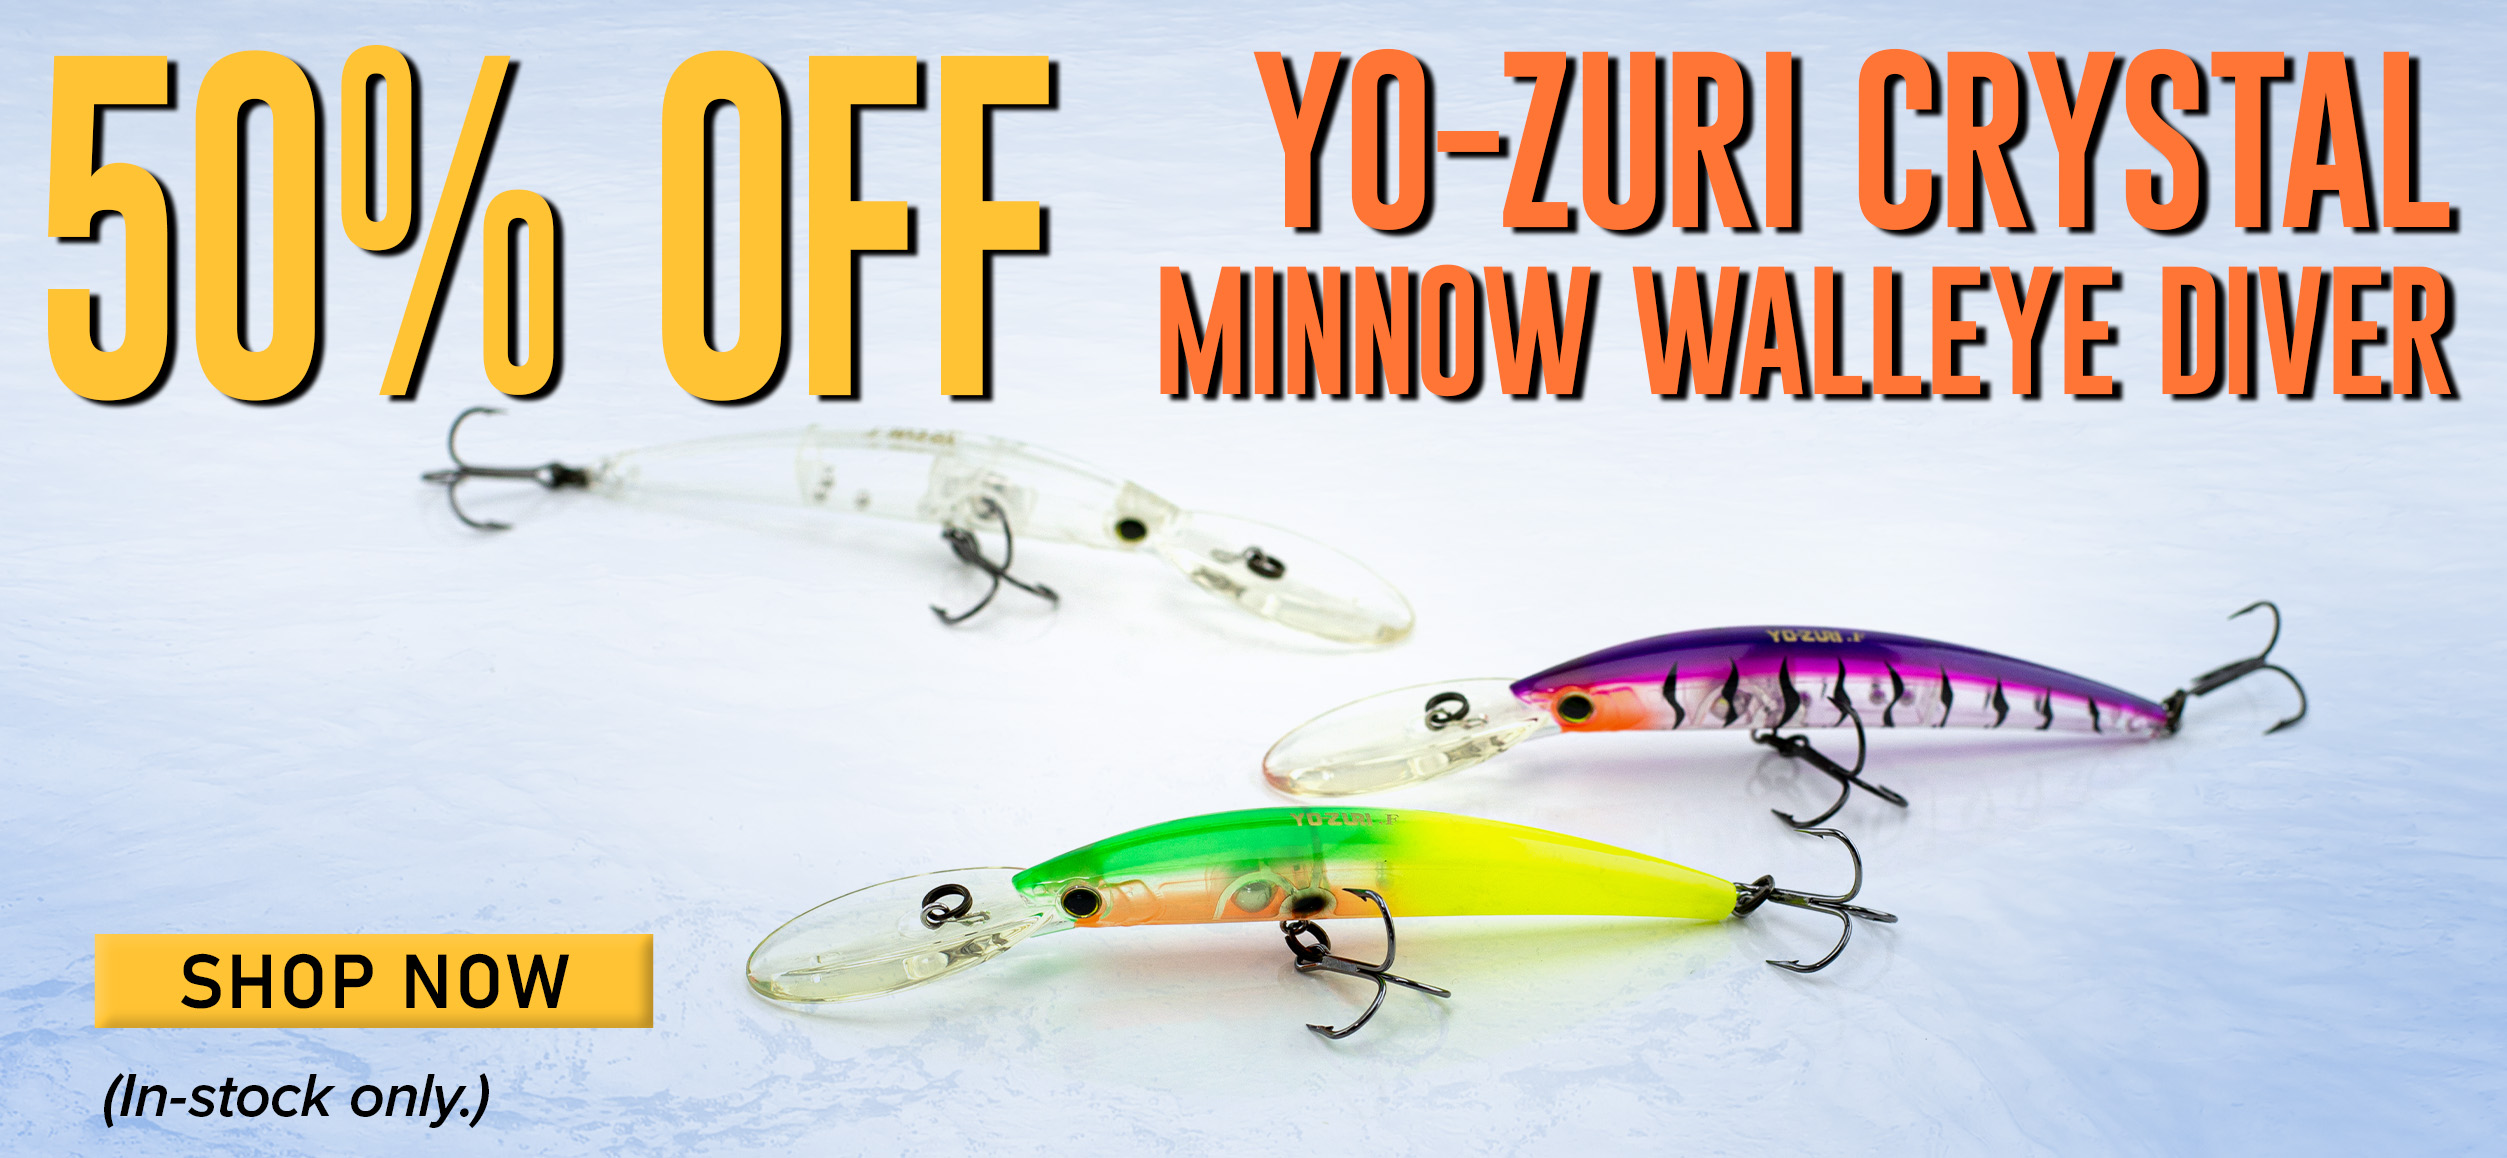 50% Off Yo-Zuri Crystal Minnow Walleye Diver Shop Now (In-stock only.)